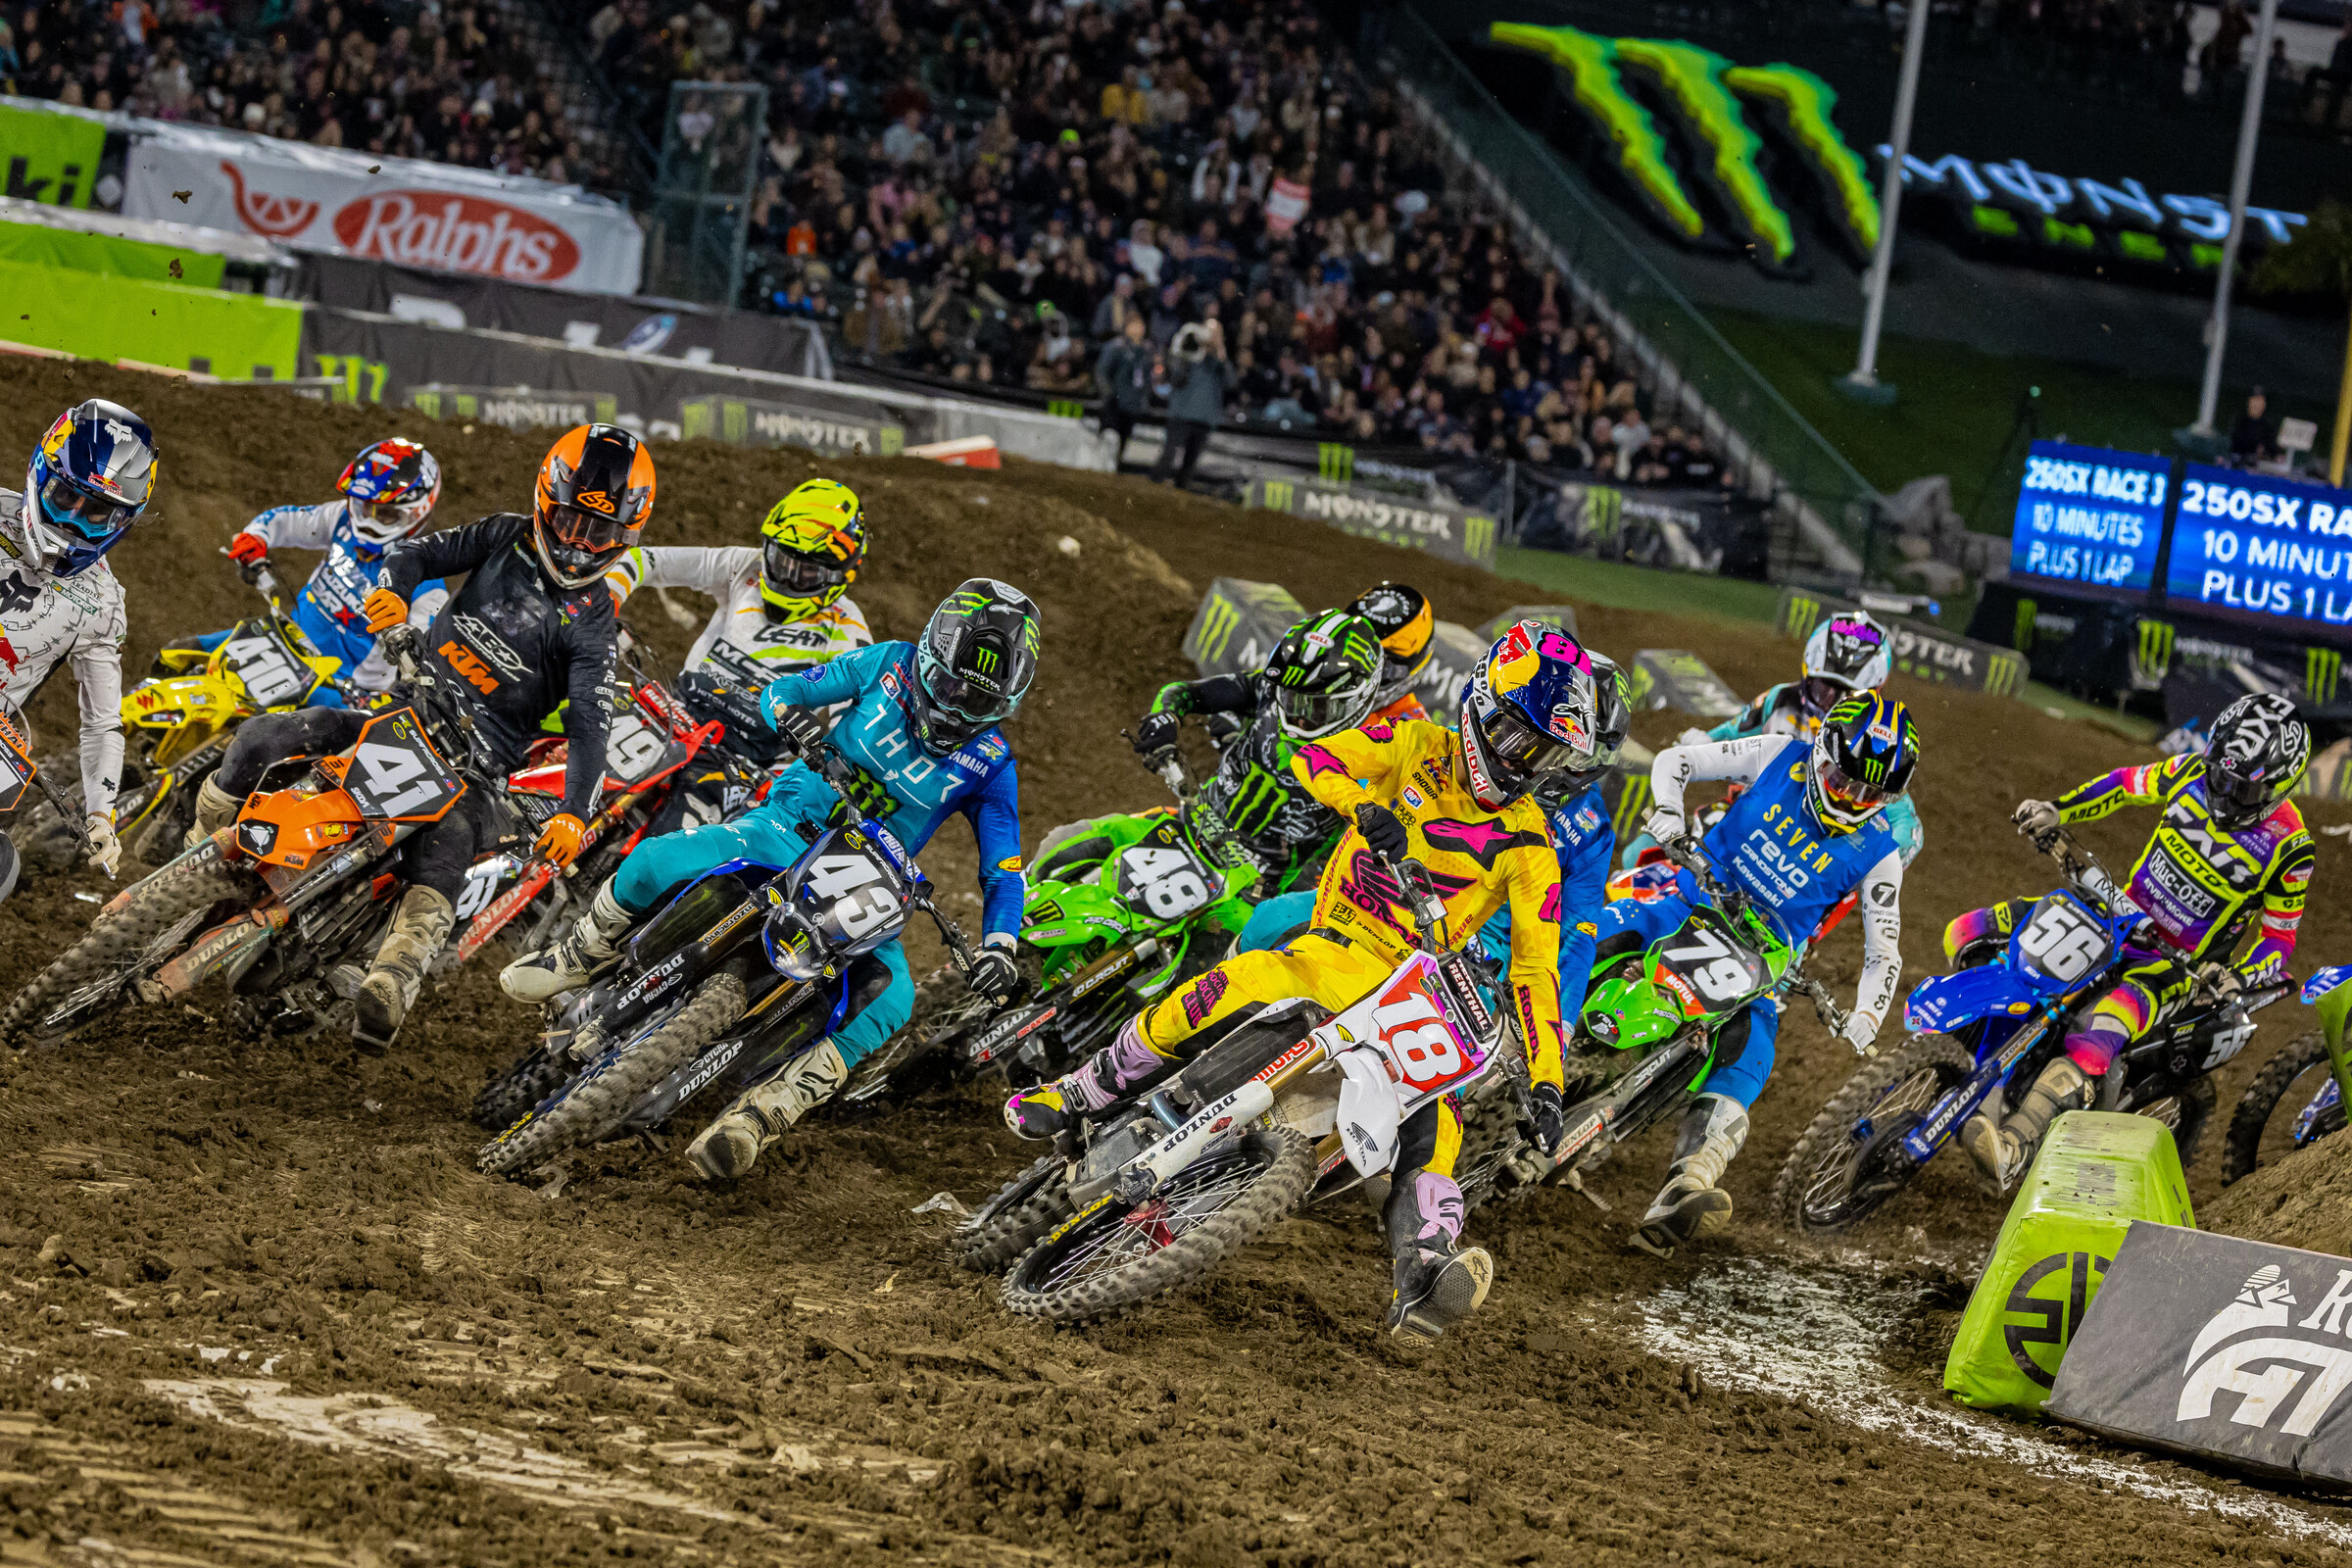 Race Report from the 2023 Anaheim 2 Supercross